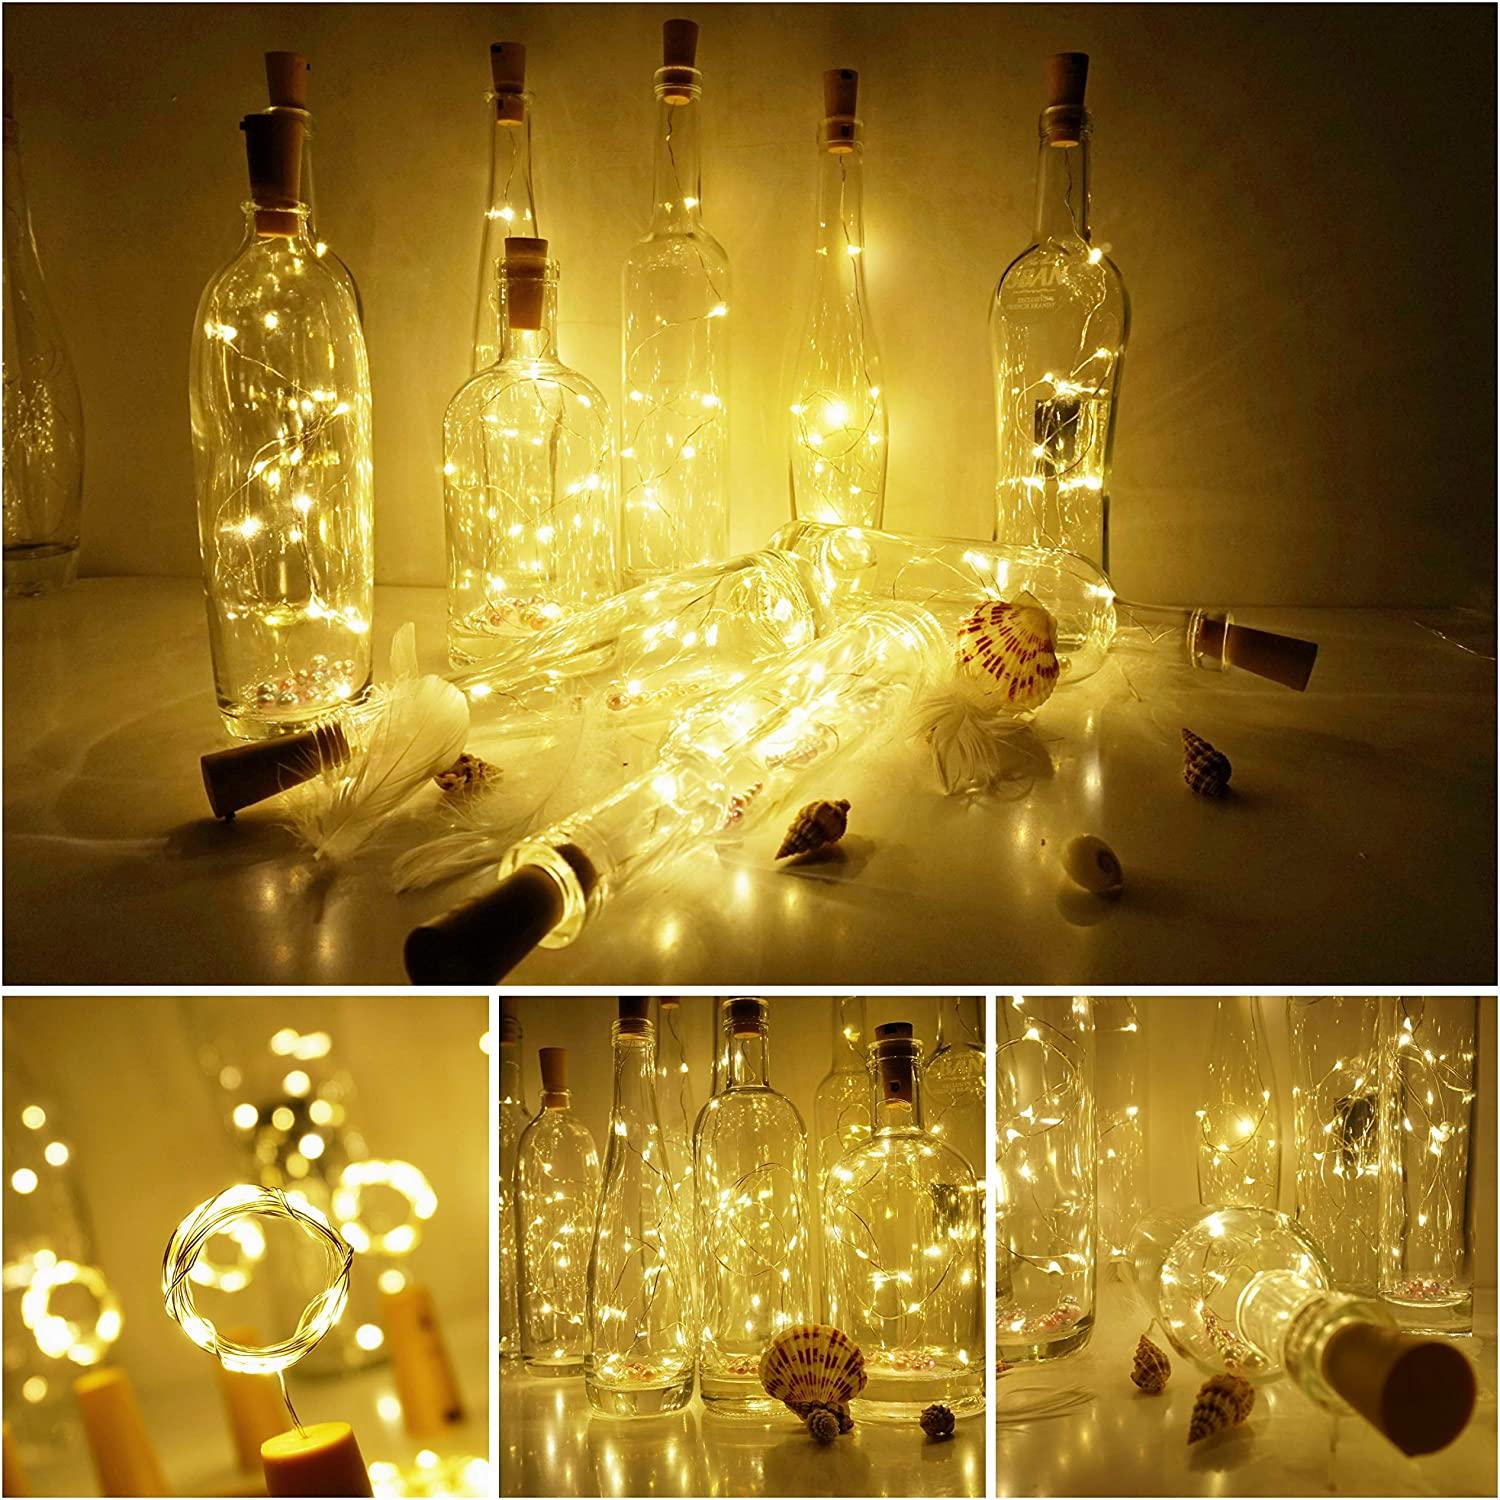 Wine Bottle Lights with Cork for DIY - If you say i do